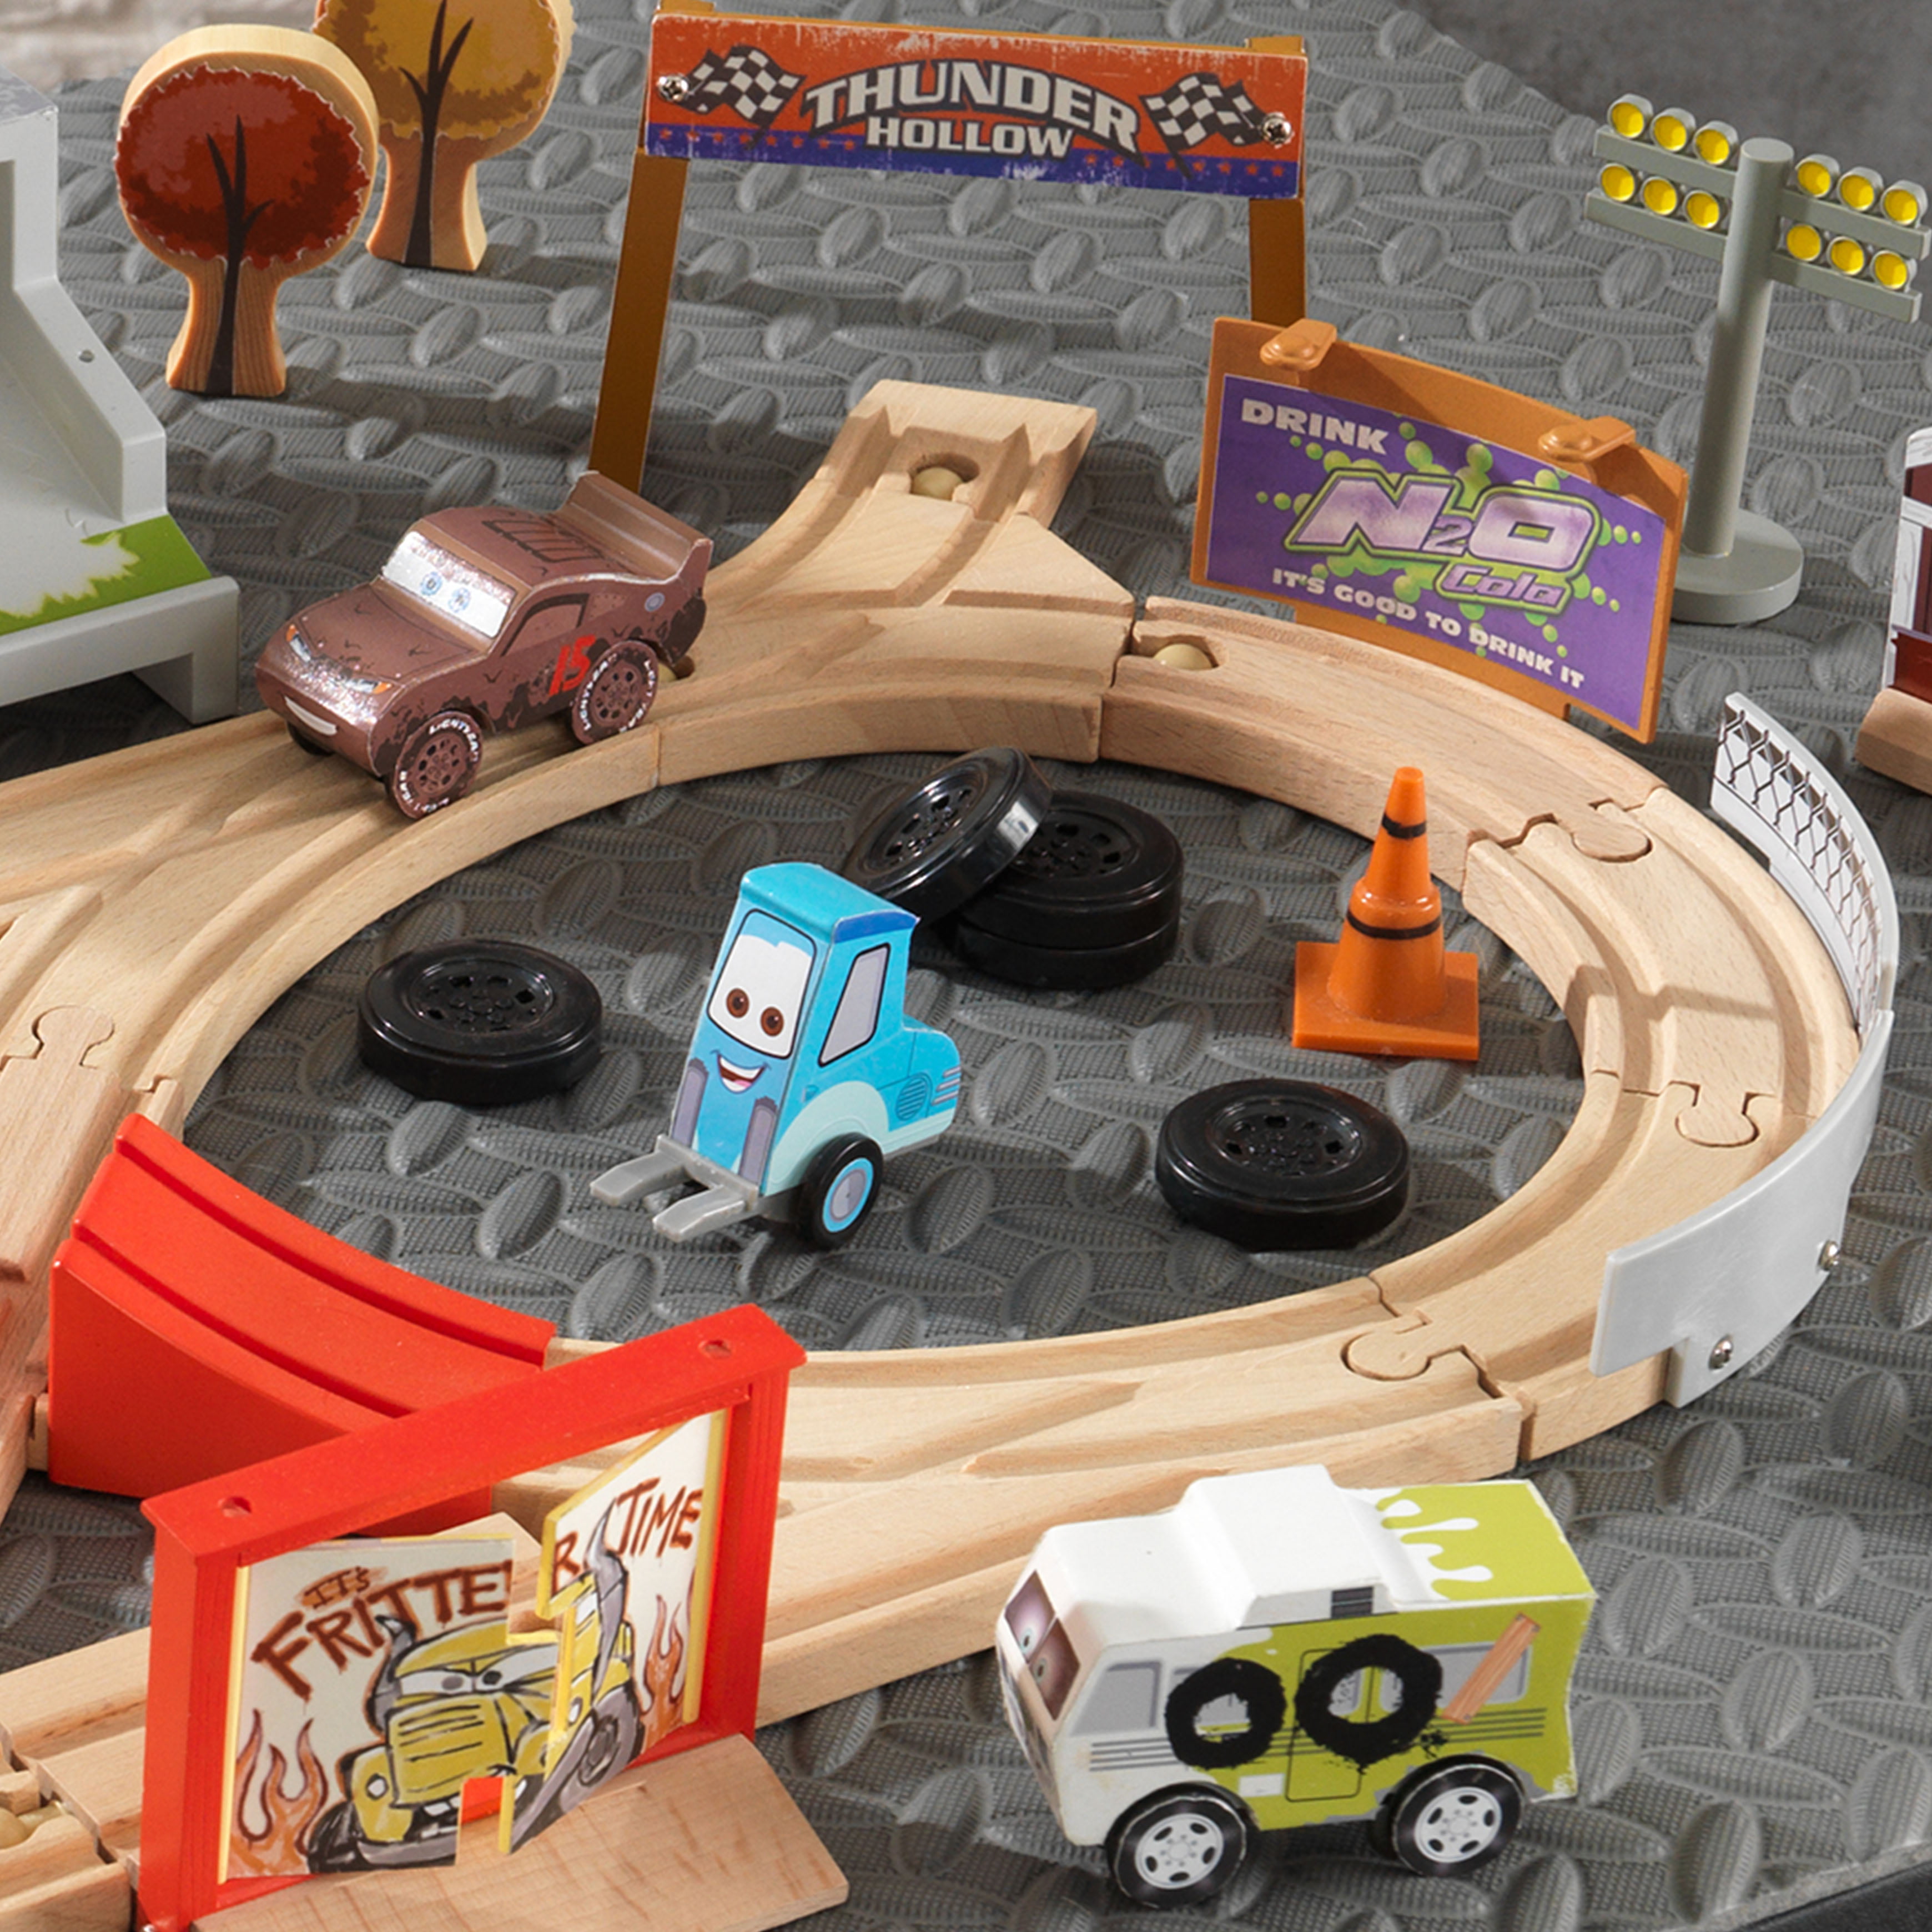 Piece Wooden Track Set with Accessories and Table Disney KIDKRAFT Pixar Cars 3 Thunder Hollow 65 